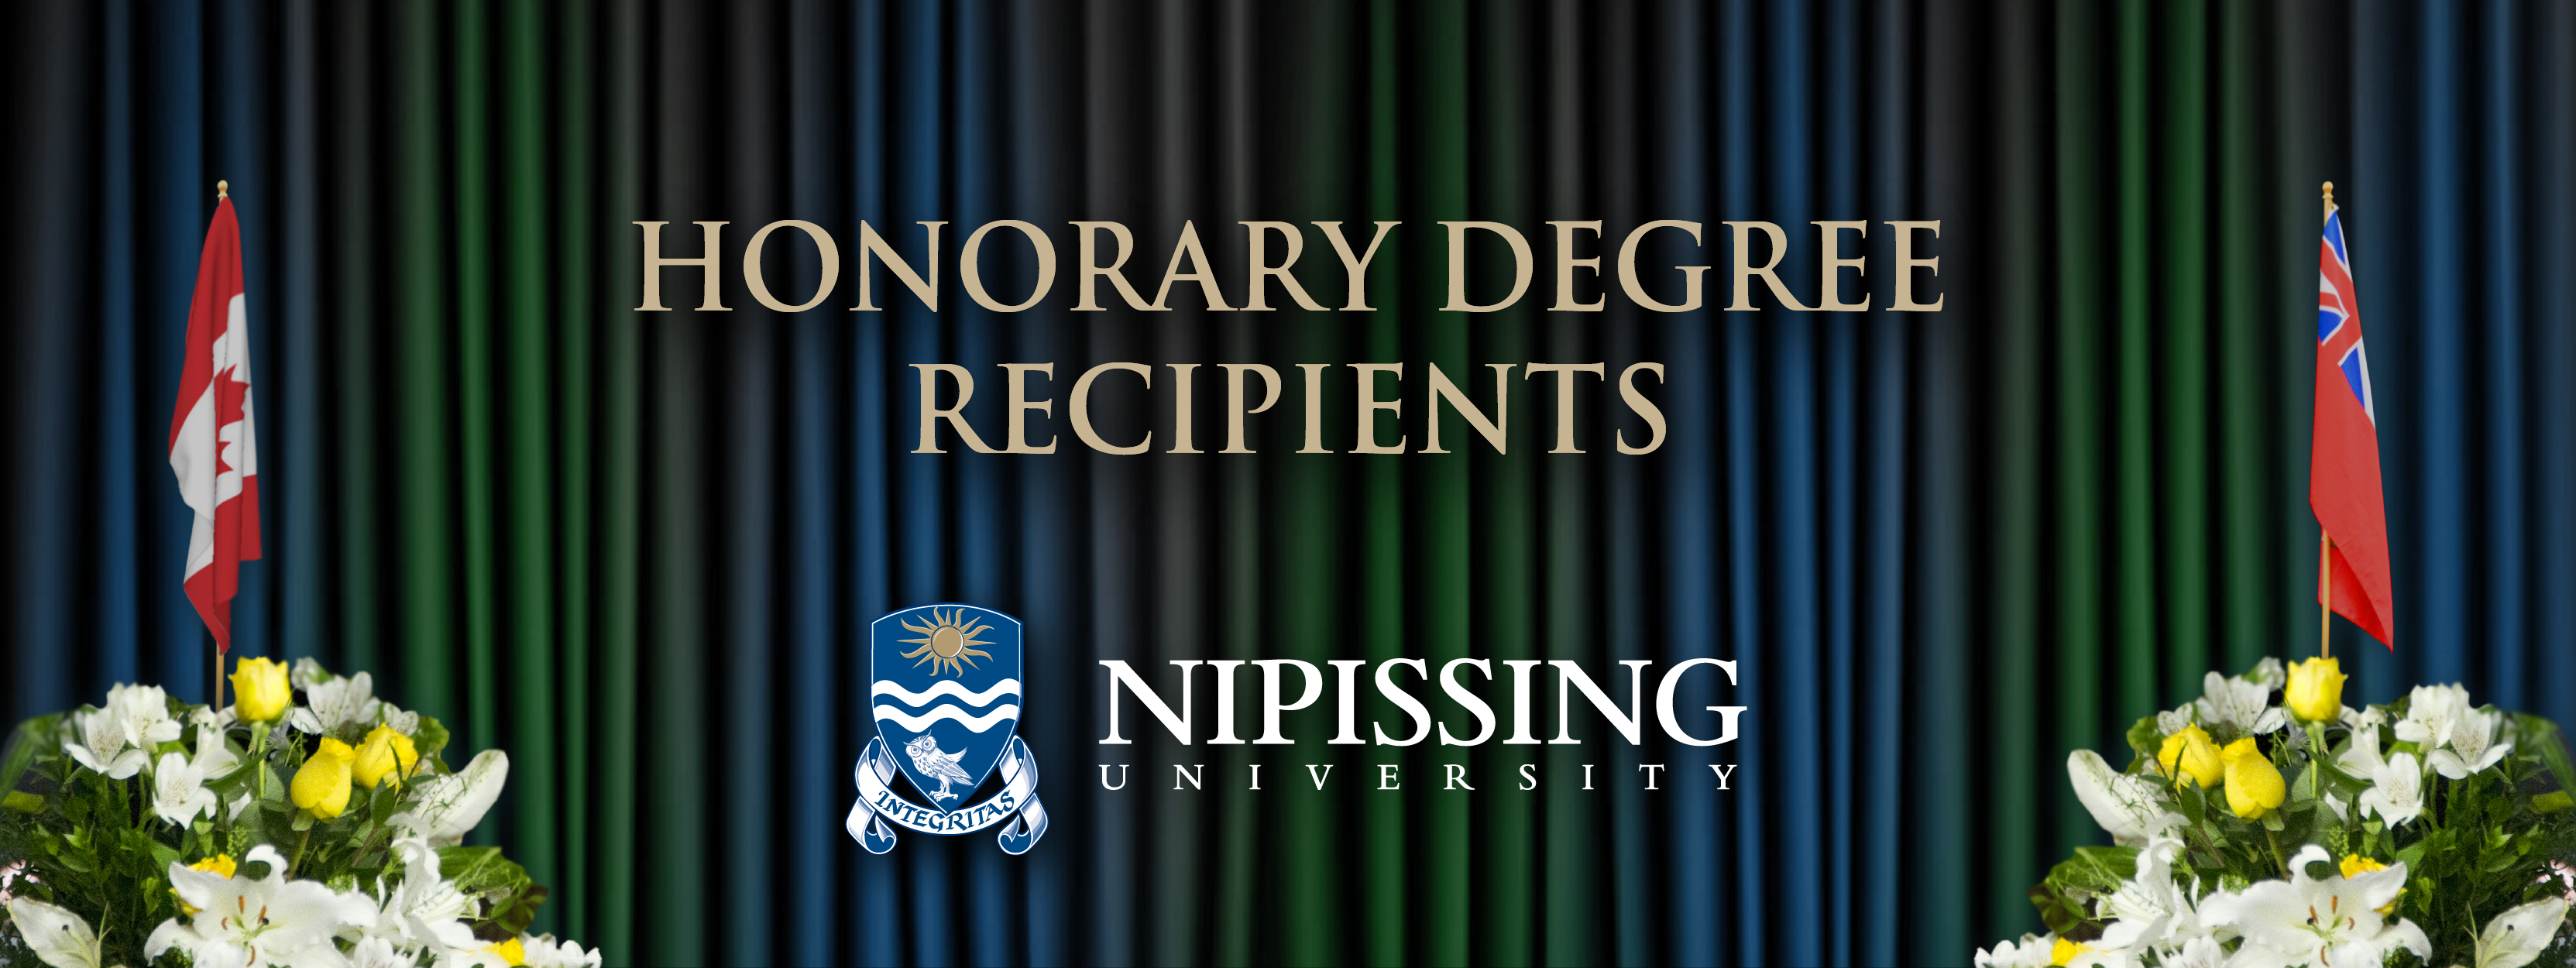 Honorary Degree Recipients and Nipissing Logo across a green and blue theatre curtain